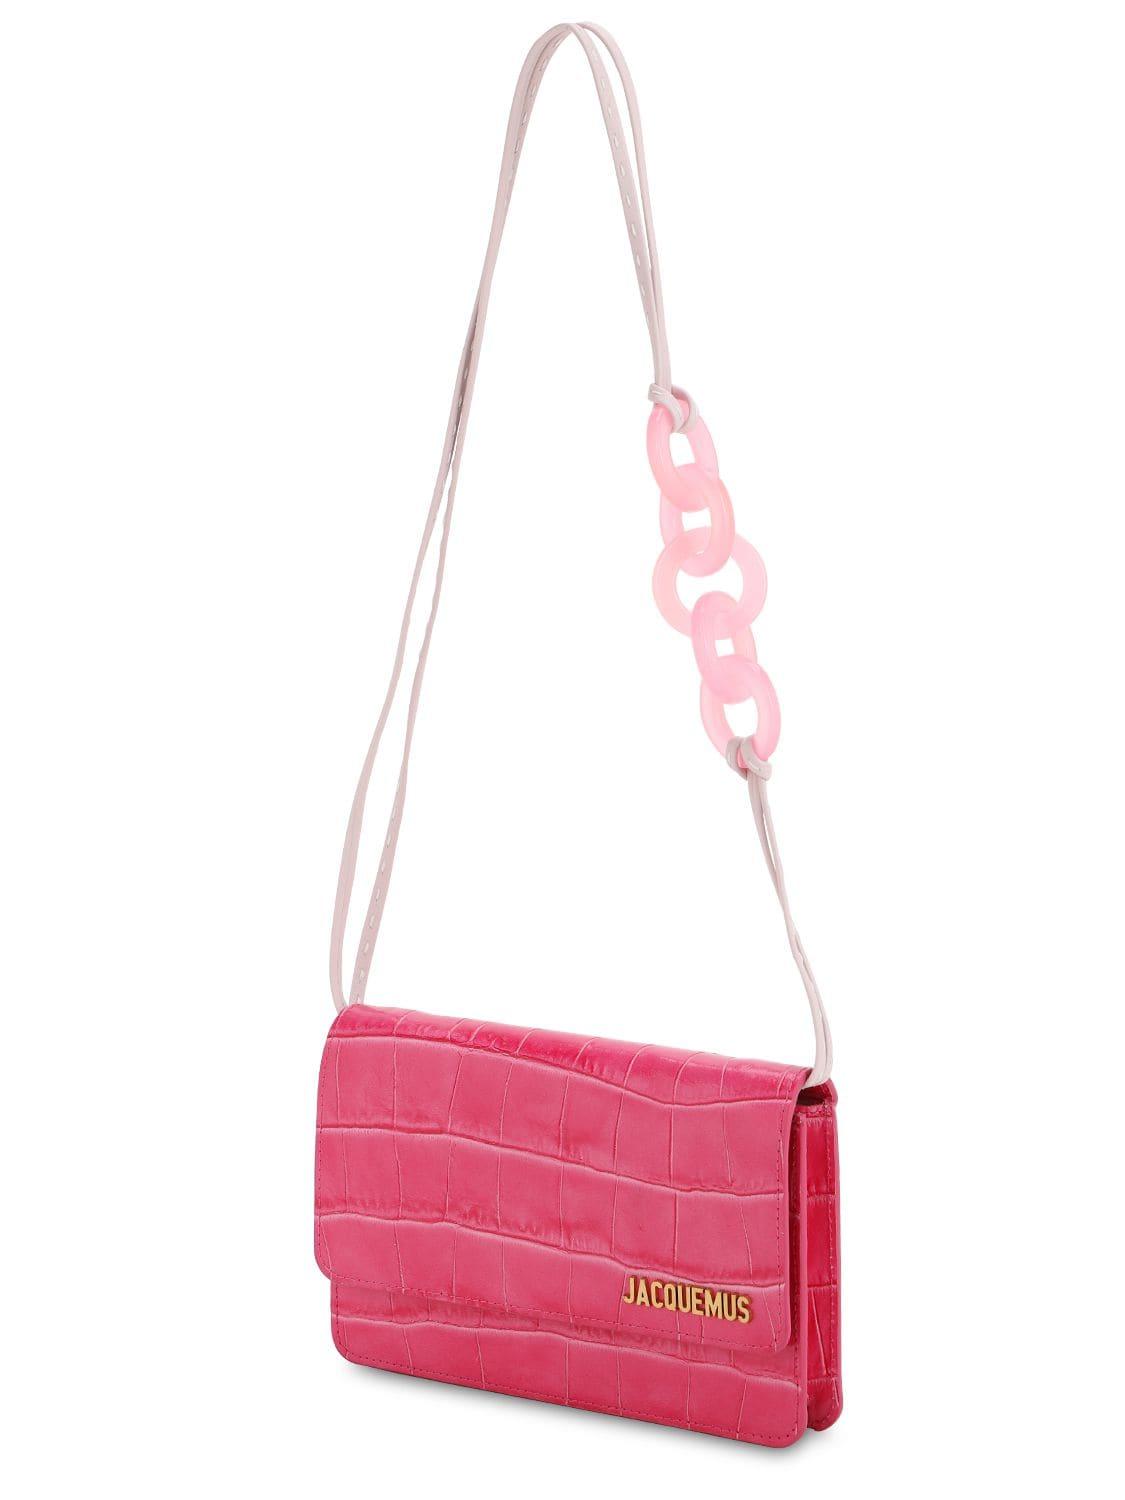 Jacquemus Leather Riviera Bag in Pink | Lyst